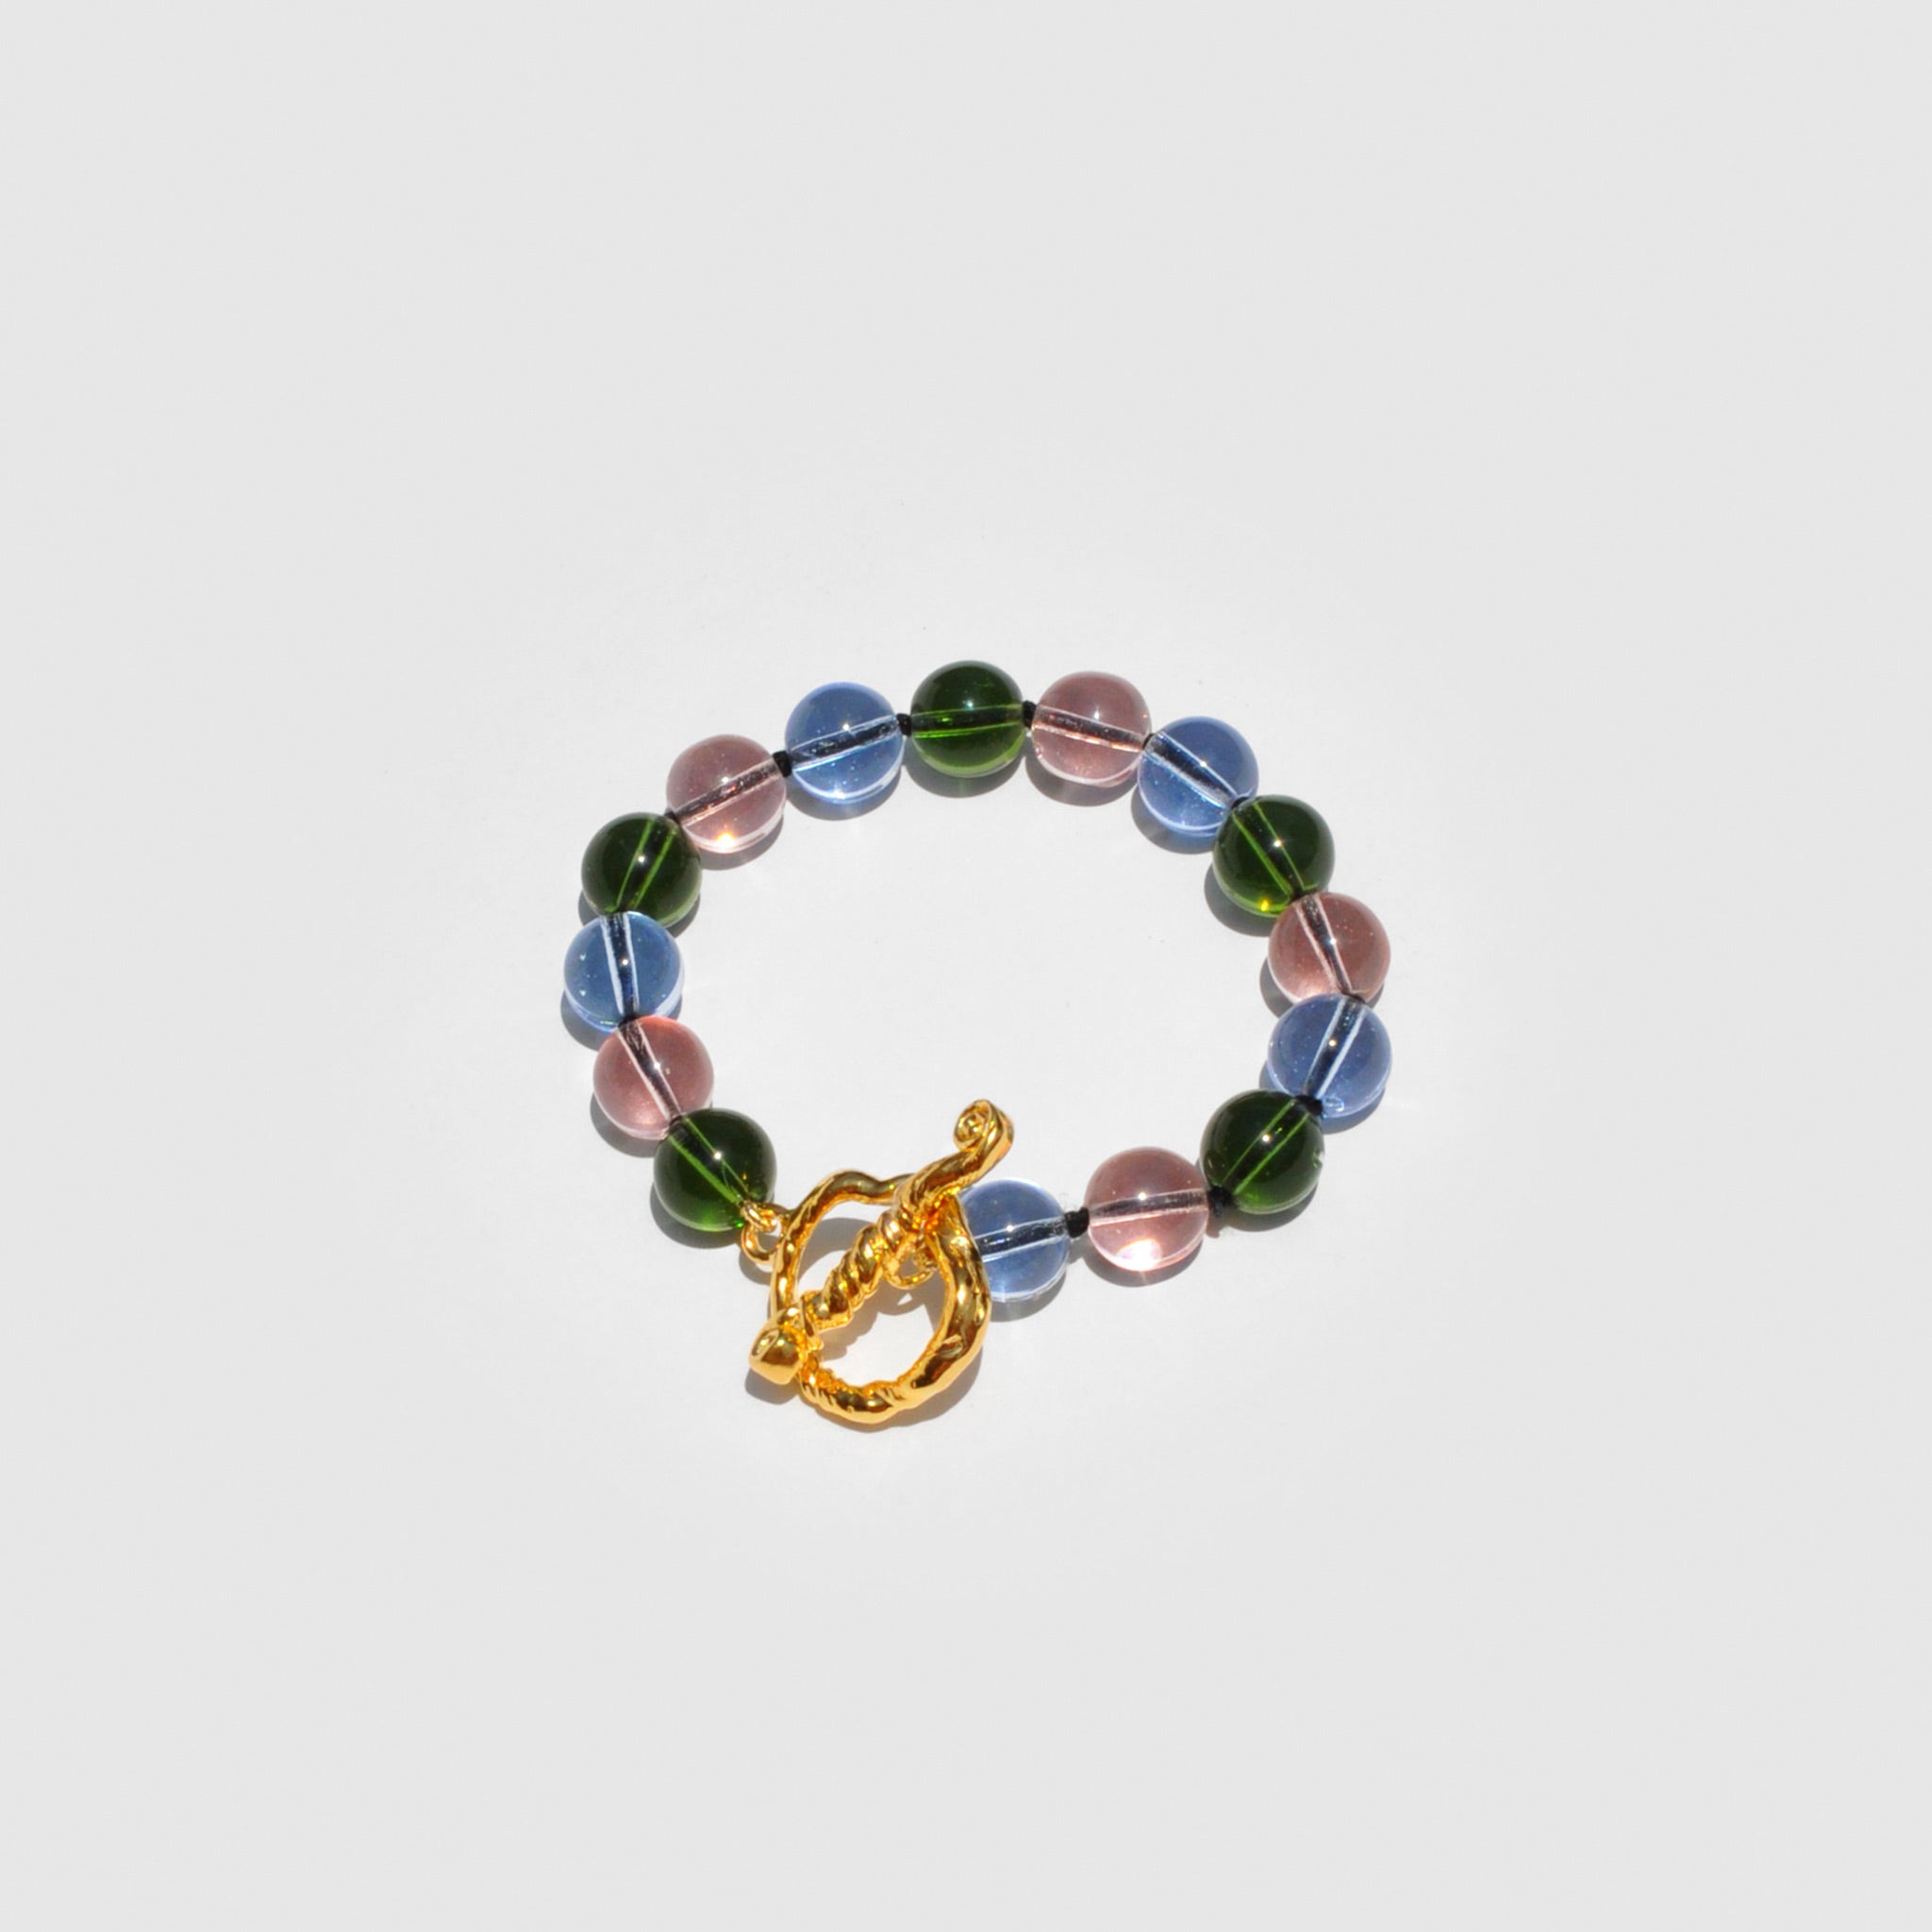 Nan Bracelet - Multi Glass from mondo mondo available at LCD. pink, blue, and green beaded bracelet with gold clasp.